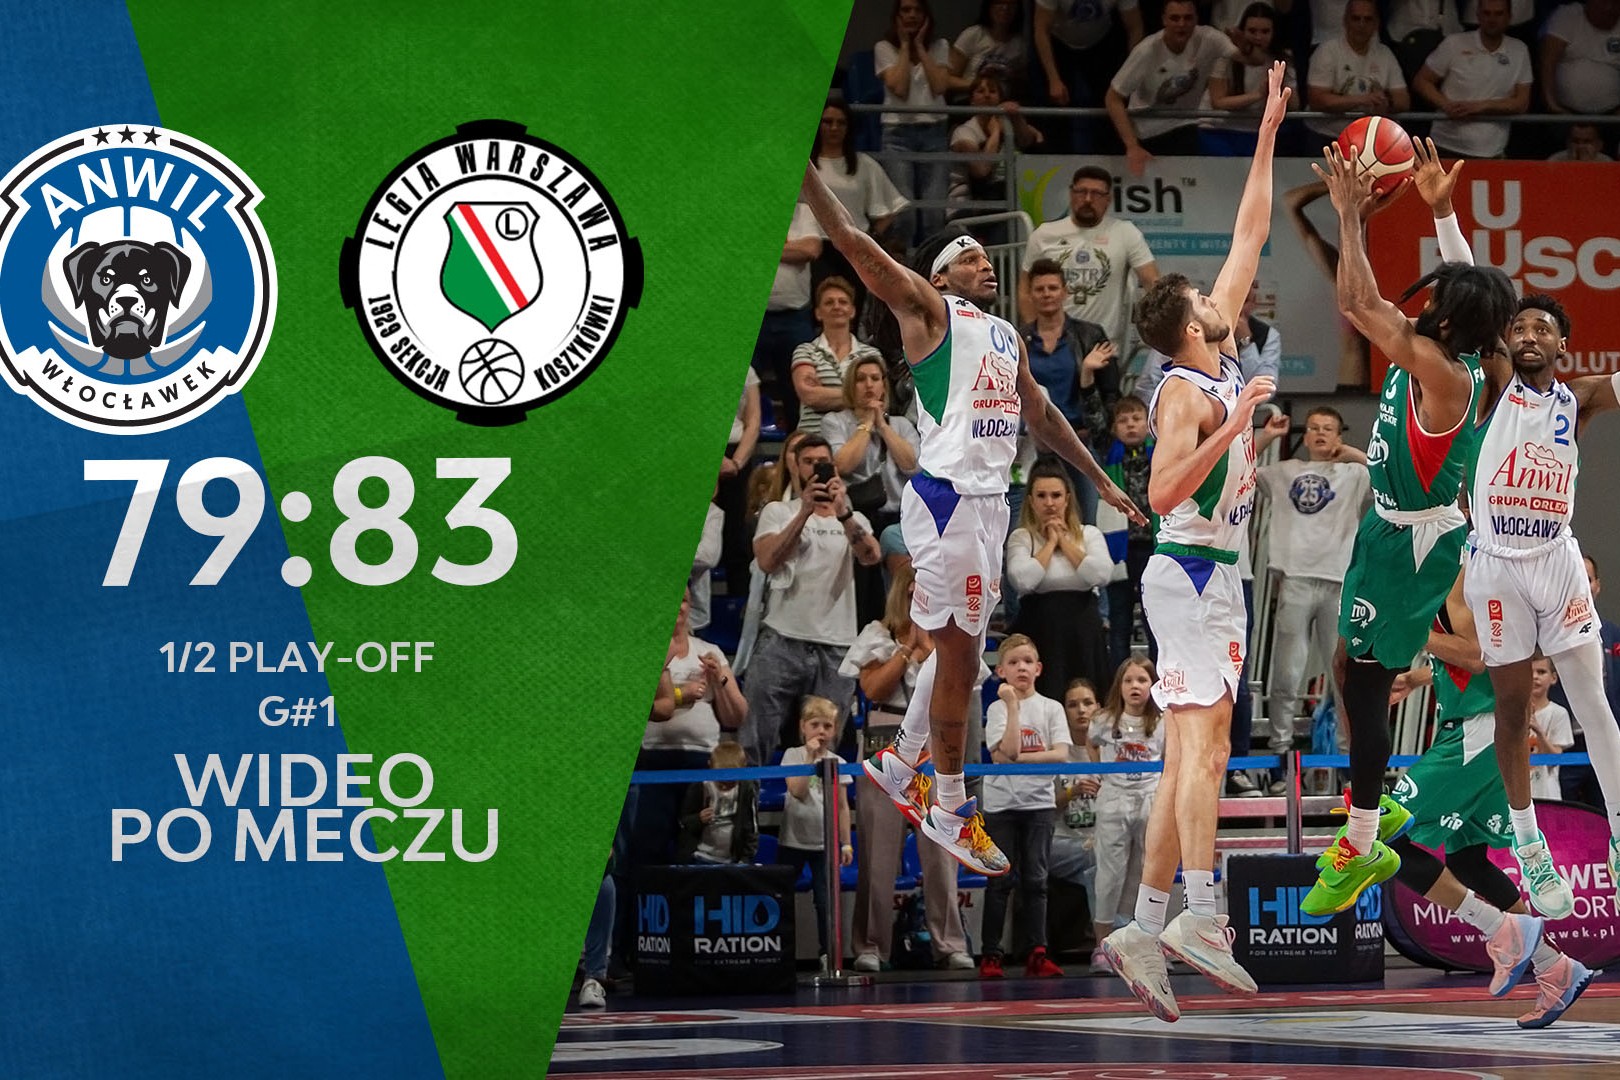 WIDEO | Anwil - Legia 1/2 Play-Off G#1